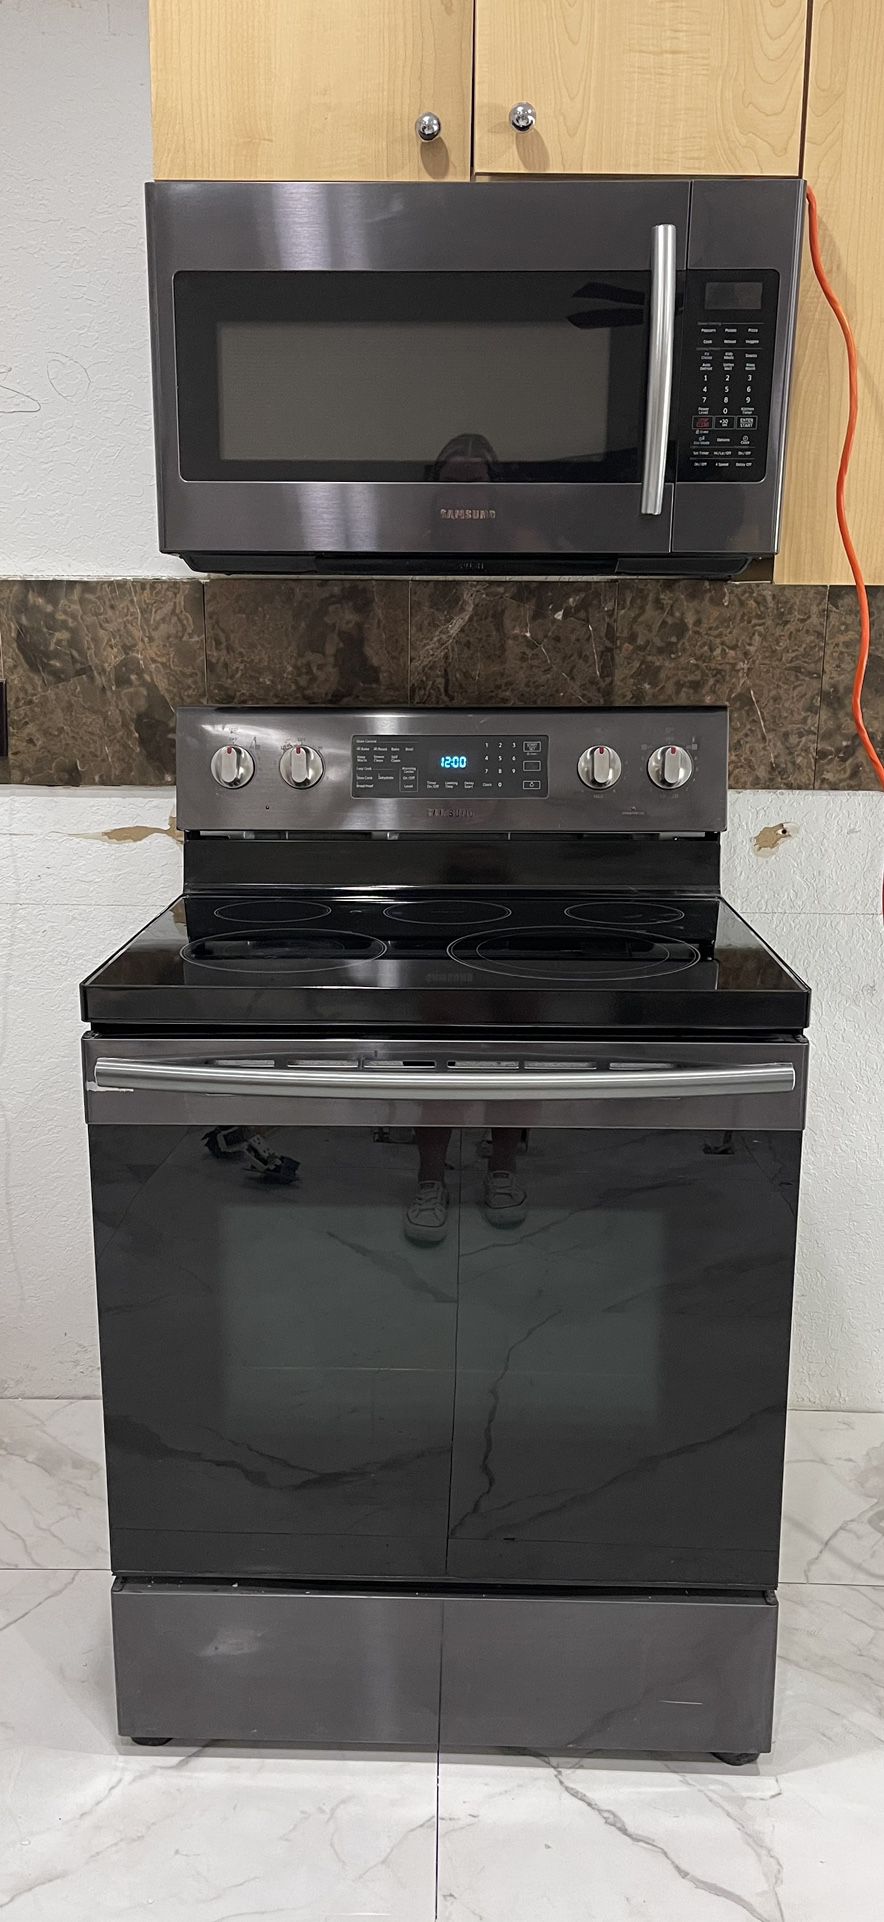 Matching set of Samsung microwave oven